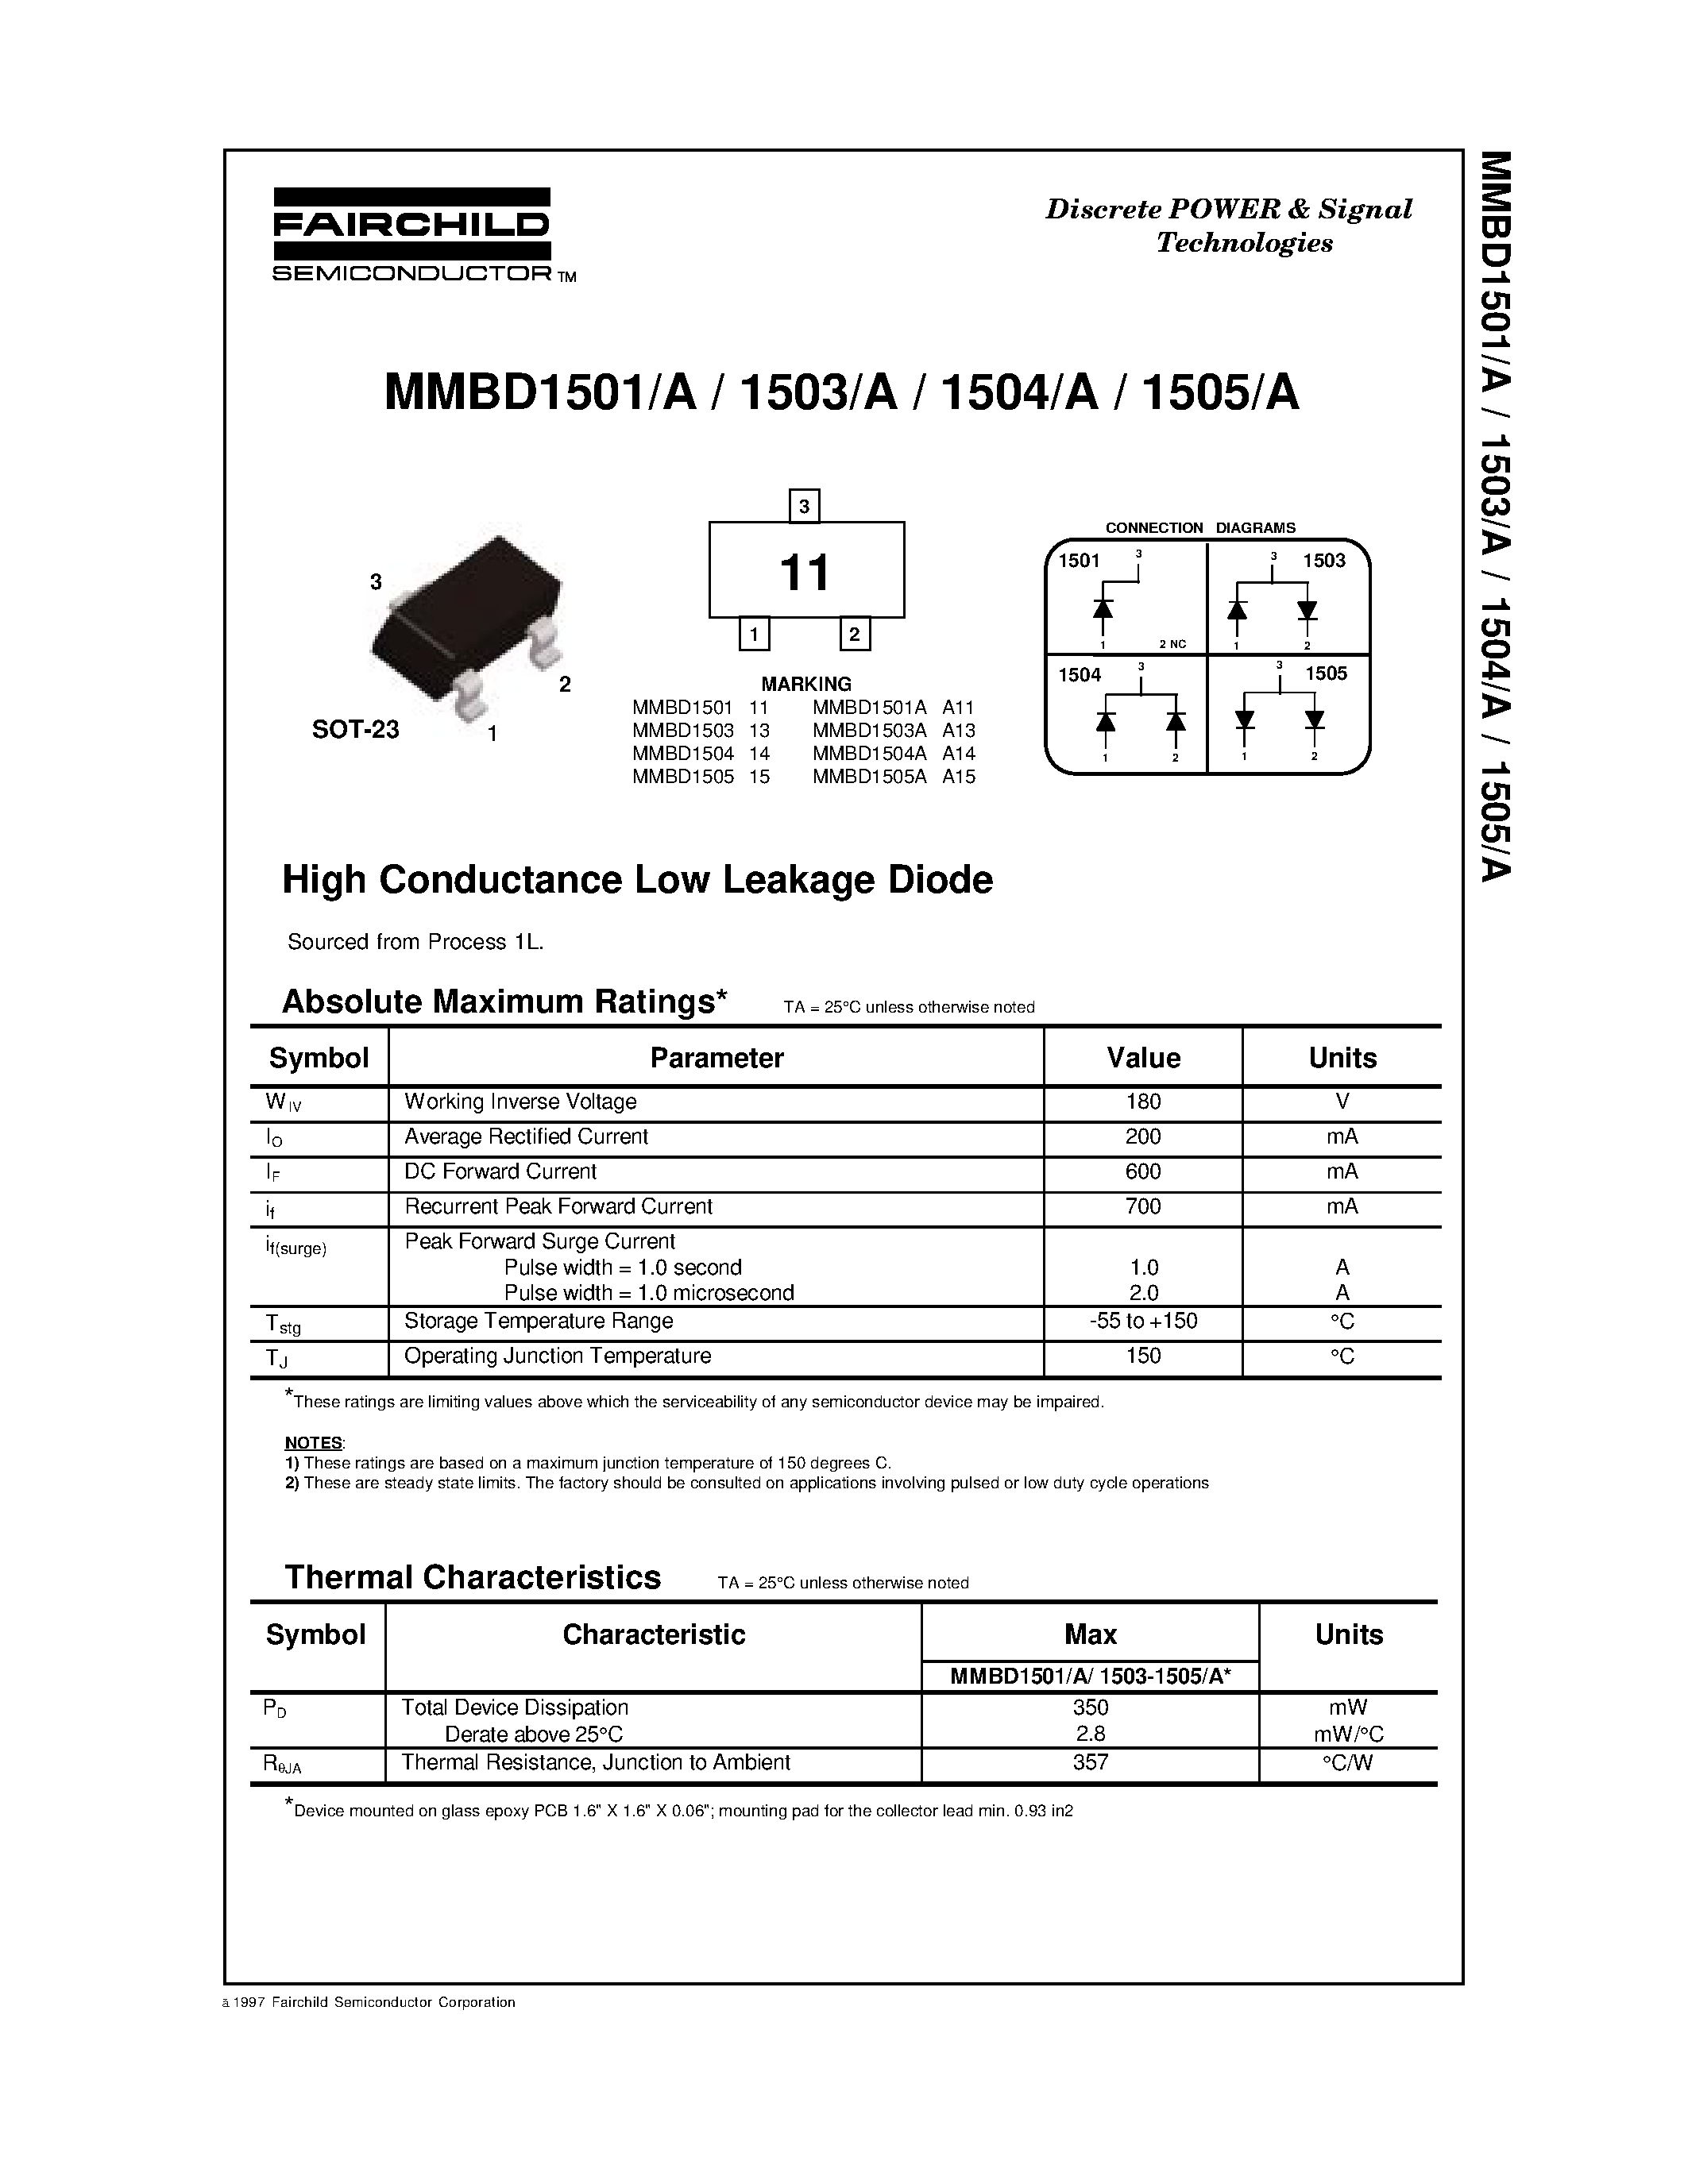 Datasheet MMBD1504A - High Conductance Low Leakage Diode page 1